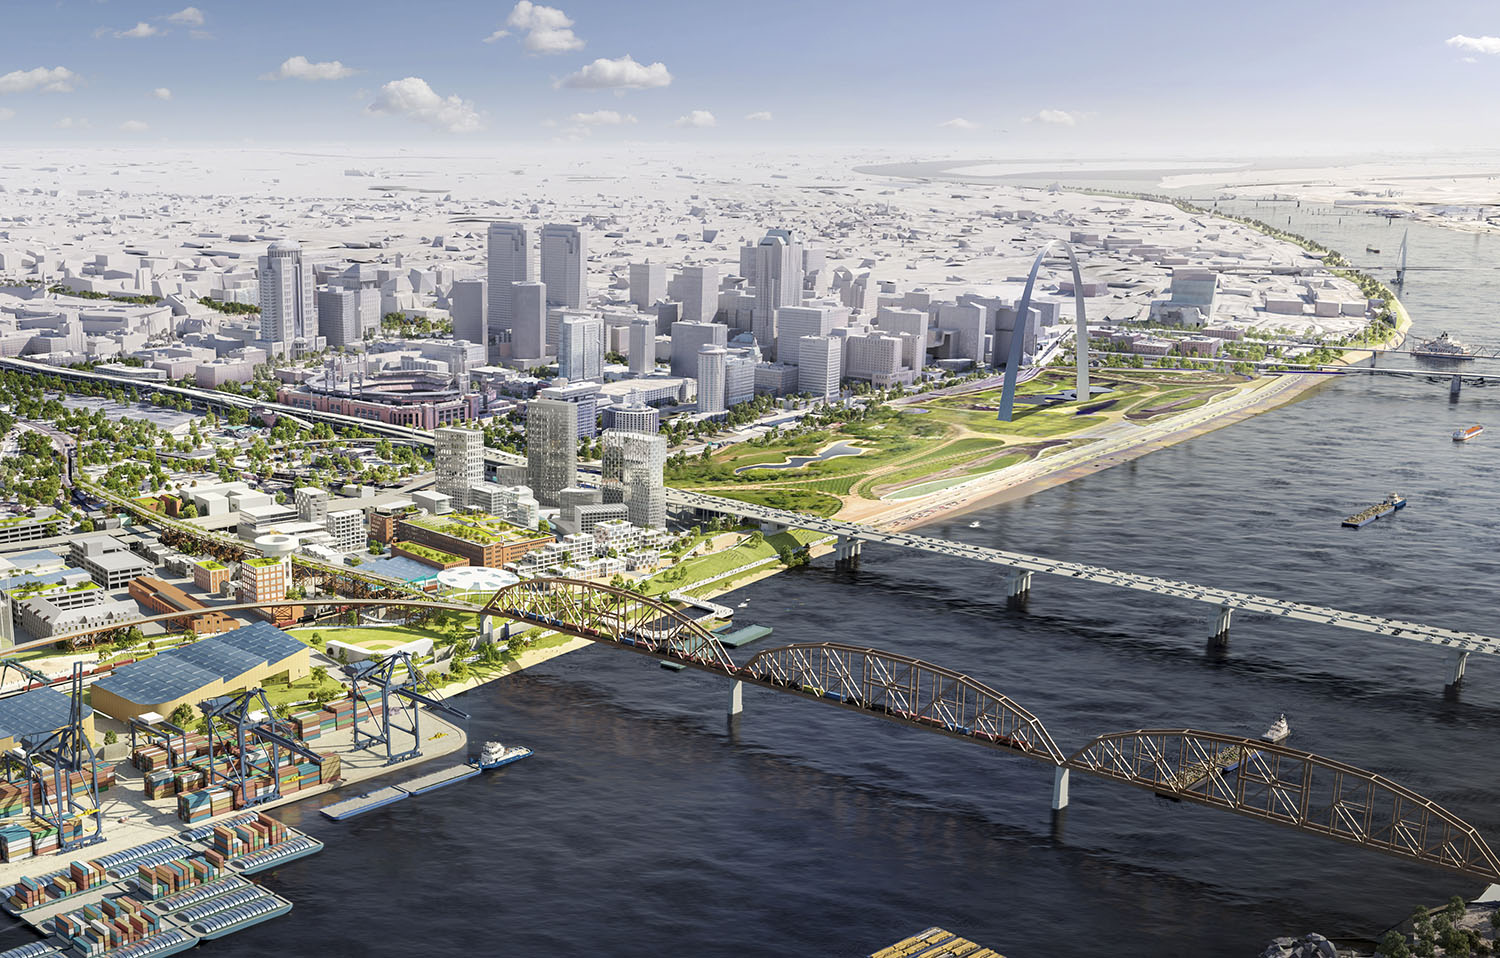 Rendering of proposal for development of Mississippi River front south of St. Louis (lower left corner of rendering). (Courtesy of Good Developments Group)